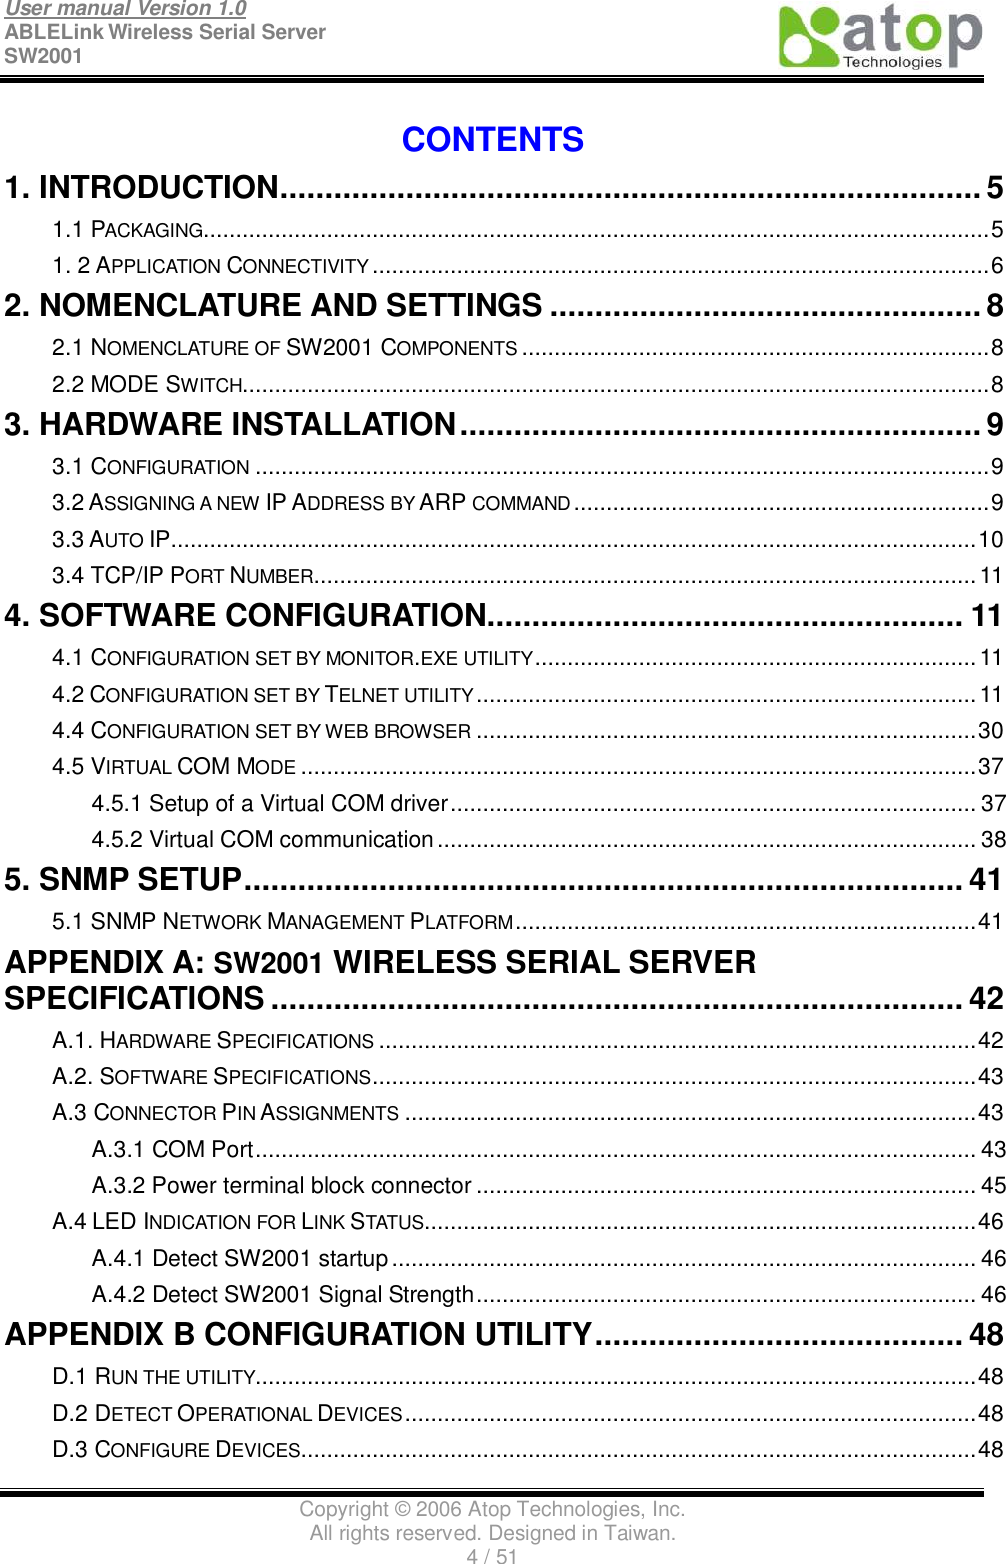 User manual Version 1.0 ABLELink Wireless Serial Server  SW2001                                                                                                                               Copyright © 2006 Atop Technologies, Inc. All rights reserved. Designed in Taiwan. 4 / 51   CONTENTS 1. INTRODUCTION..............................................................................5 1.1 PACKAGING.........................................................................................................................5 1. 2 APPLICATION CONNECTIVITY ...............................................................................................6 2. NOMENCLATURE AND SETTINGS................................................8 2.1 NOMENCLATURE OF SW2001 COMPONENTS ........................................................................8 2.2 MODE SWITCH...................................................................................................................8 3. HARDWARE INSTALLATION..........................................................9 3.1 CONFIGURATION .................................................................................................................9 3.2 ASSIGNING A NEW IP ADDRESS BY ARP COMMAND ................................................................9 3.3 AUTO IP............................................................................................................................10 3.4 TCP/IP PORT NUMBER......................................................................................................11 4. SOFTWARE CONFIGURATION.....................................................11 4.1 CONFIGURATION SET BY MONITOR.EXE UTILITY....................................................................11 4.2 CONFIGURATION SET BY TELNET UTILITY.............................................................................11 4.4 CONFIGURATION SET BY WEB BROWSER .............................................................................30 4.5 VIRTUAL COM MODE ........................................................................................................37 4.5.1 Setup of a Virtual COM driver.................................................................................37 4.5.2 Virtual COM communication...................................................................................38 5. SNMP SETUP................................................................................41 5.1 SNMP NETWORK MANAGEMENT PLATFORM.......................................................................41 APPENDIX A: SW2001 WIRELESS SERIAL SERVER SPECIFICATIONS.............................................................................42 A.1. HARDWARE SPECIFICATIONS ............................................................................................42 A.2. SOFTWARE SPECIFICATIONS.............................................................................................43 A.3 CONNECTOR PIN ASSIGNMENTS ........................................................................................43 A.3.1 COM Port...............................................................................................................43 A.3.2 Power terminal block connector.............................................................................45 A.4 LED INDICATION FOR LINK STATUS.....................................................................................46 A.4.1 Detect SW2001 startup..........................................................................................46 A.4.2 Detect SW2001 Signal Strength.............................................................................46 APPENDIX B CONFIGURATION UTILITY.........................................48 D.1 RUN THE UTILITY...............................................................................................................48 D.2 DETECT OPERATIONAL DEVICES........................................................................................48 D.3 CONFIGURE DEVICES........................................................................................................48 